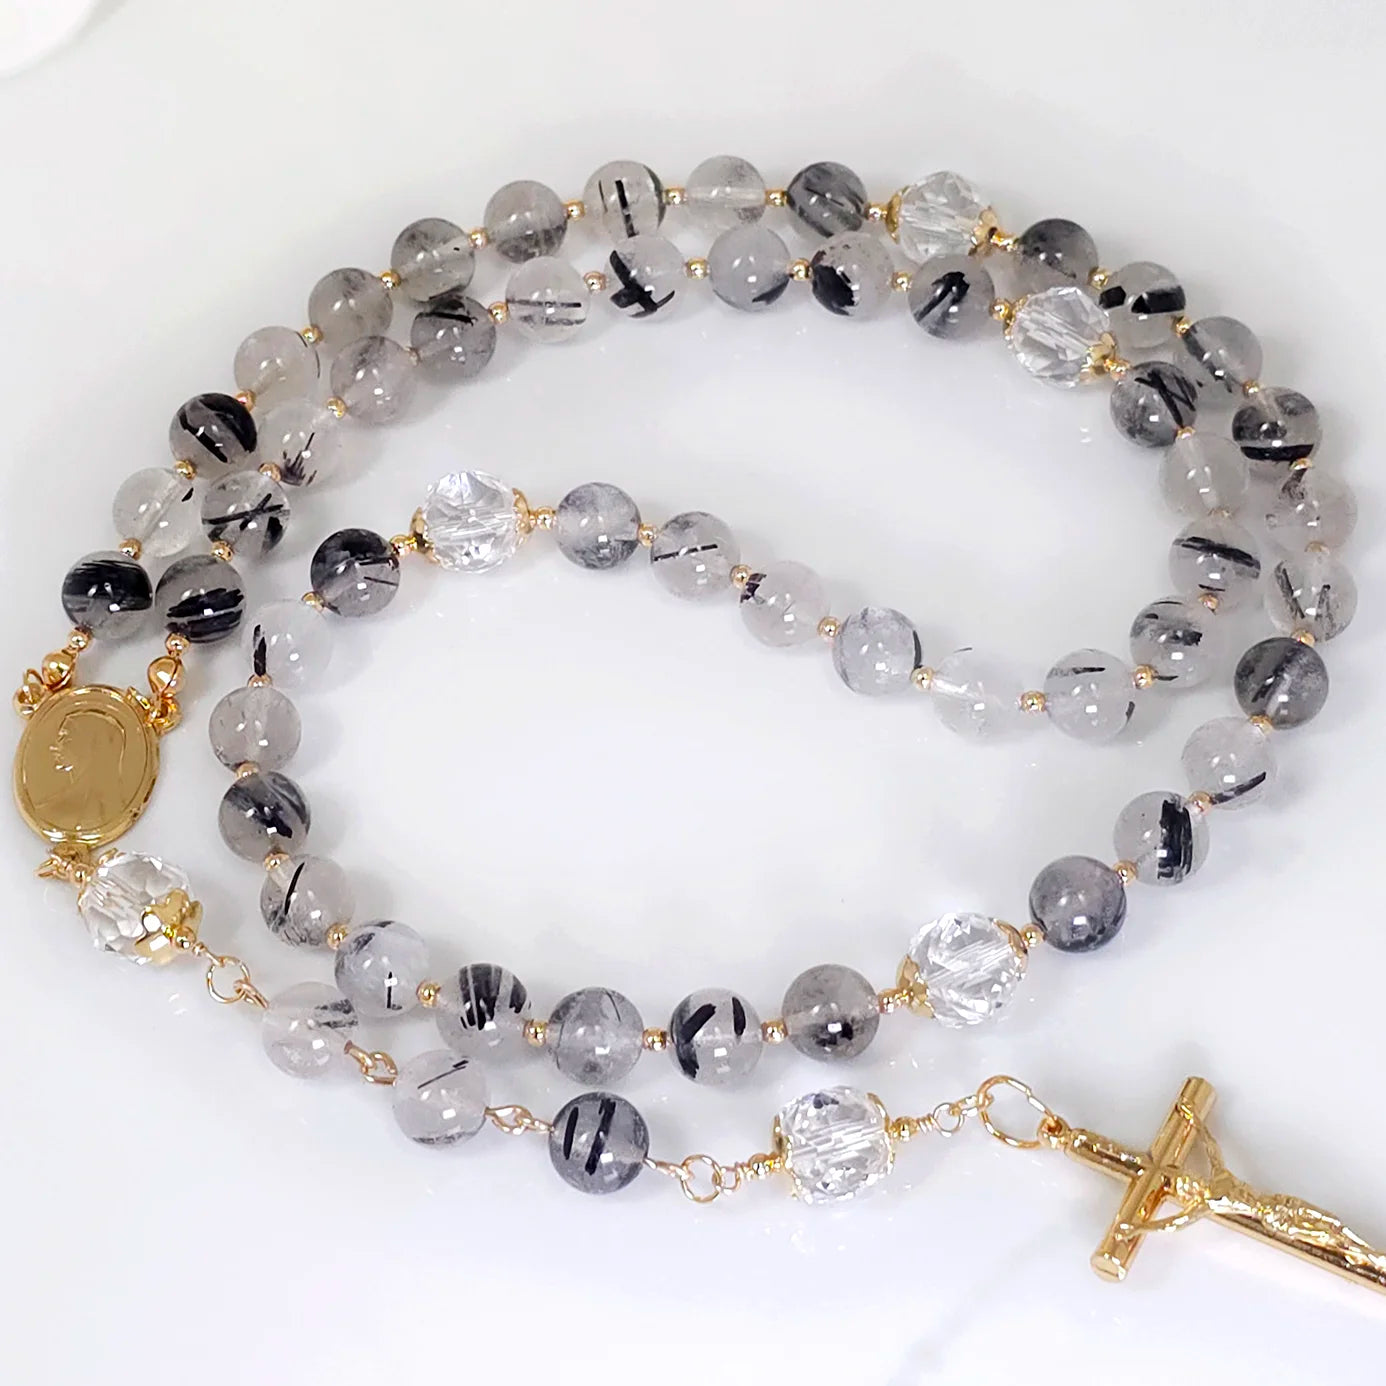 Handcrafted Rosaries for a Mission - The Luminous Beads